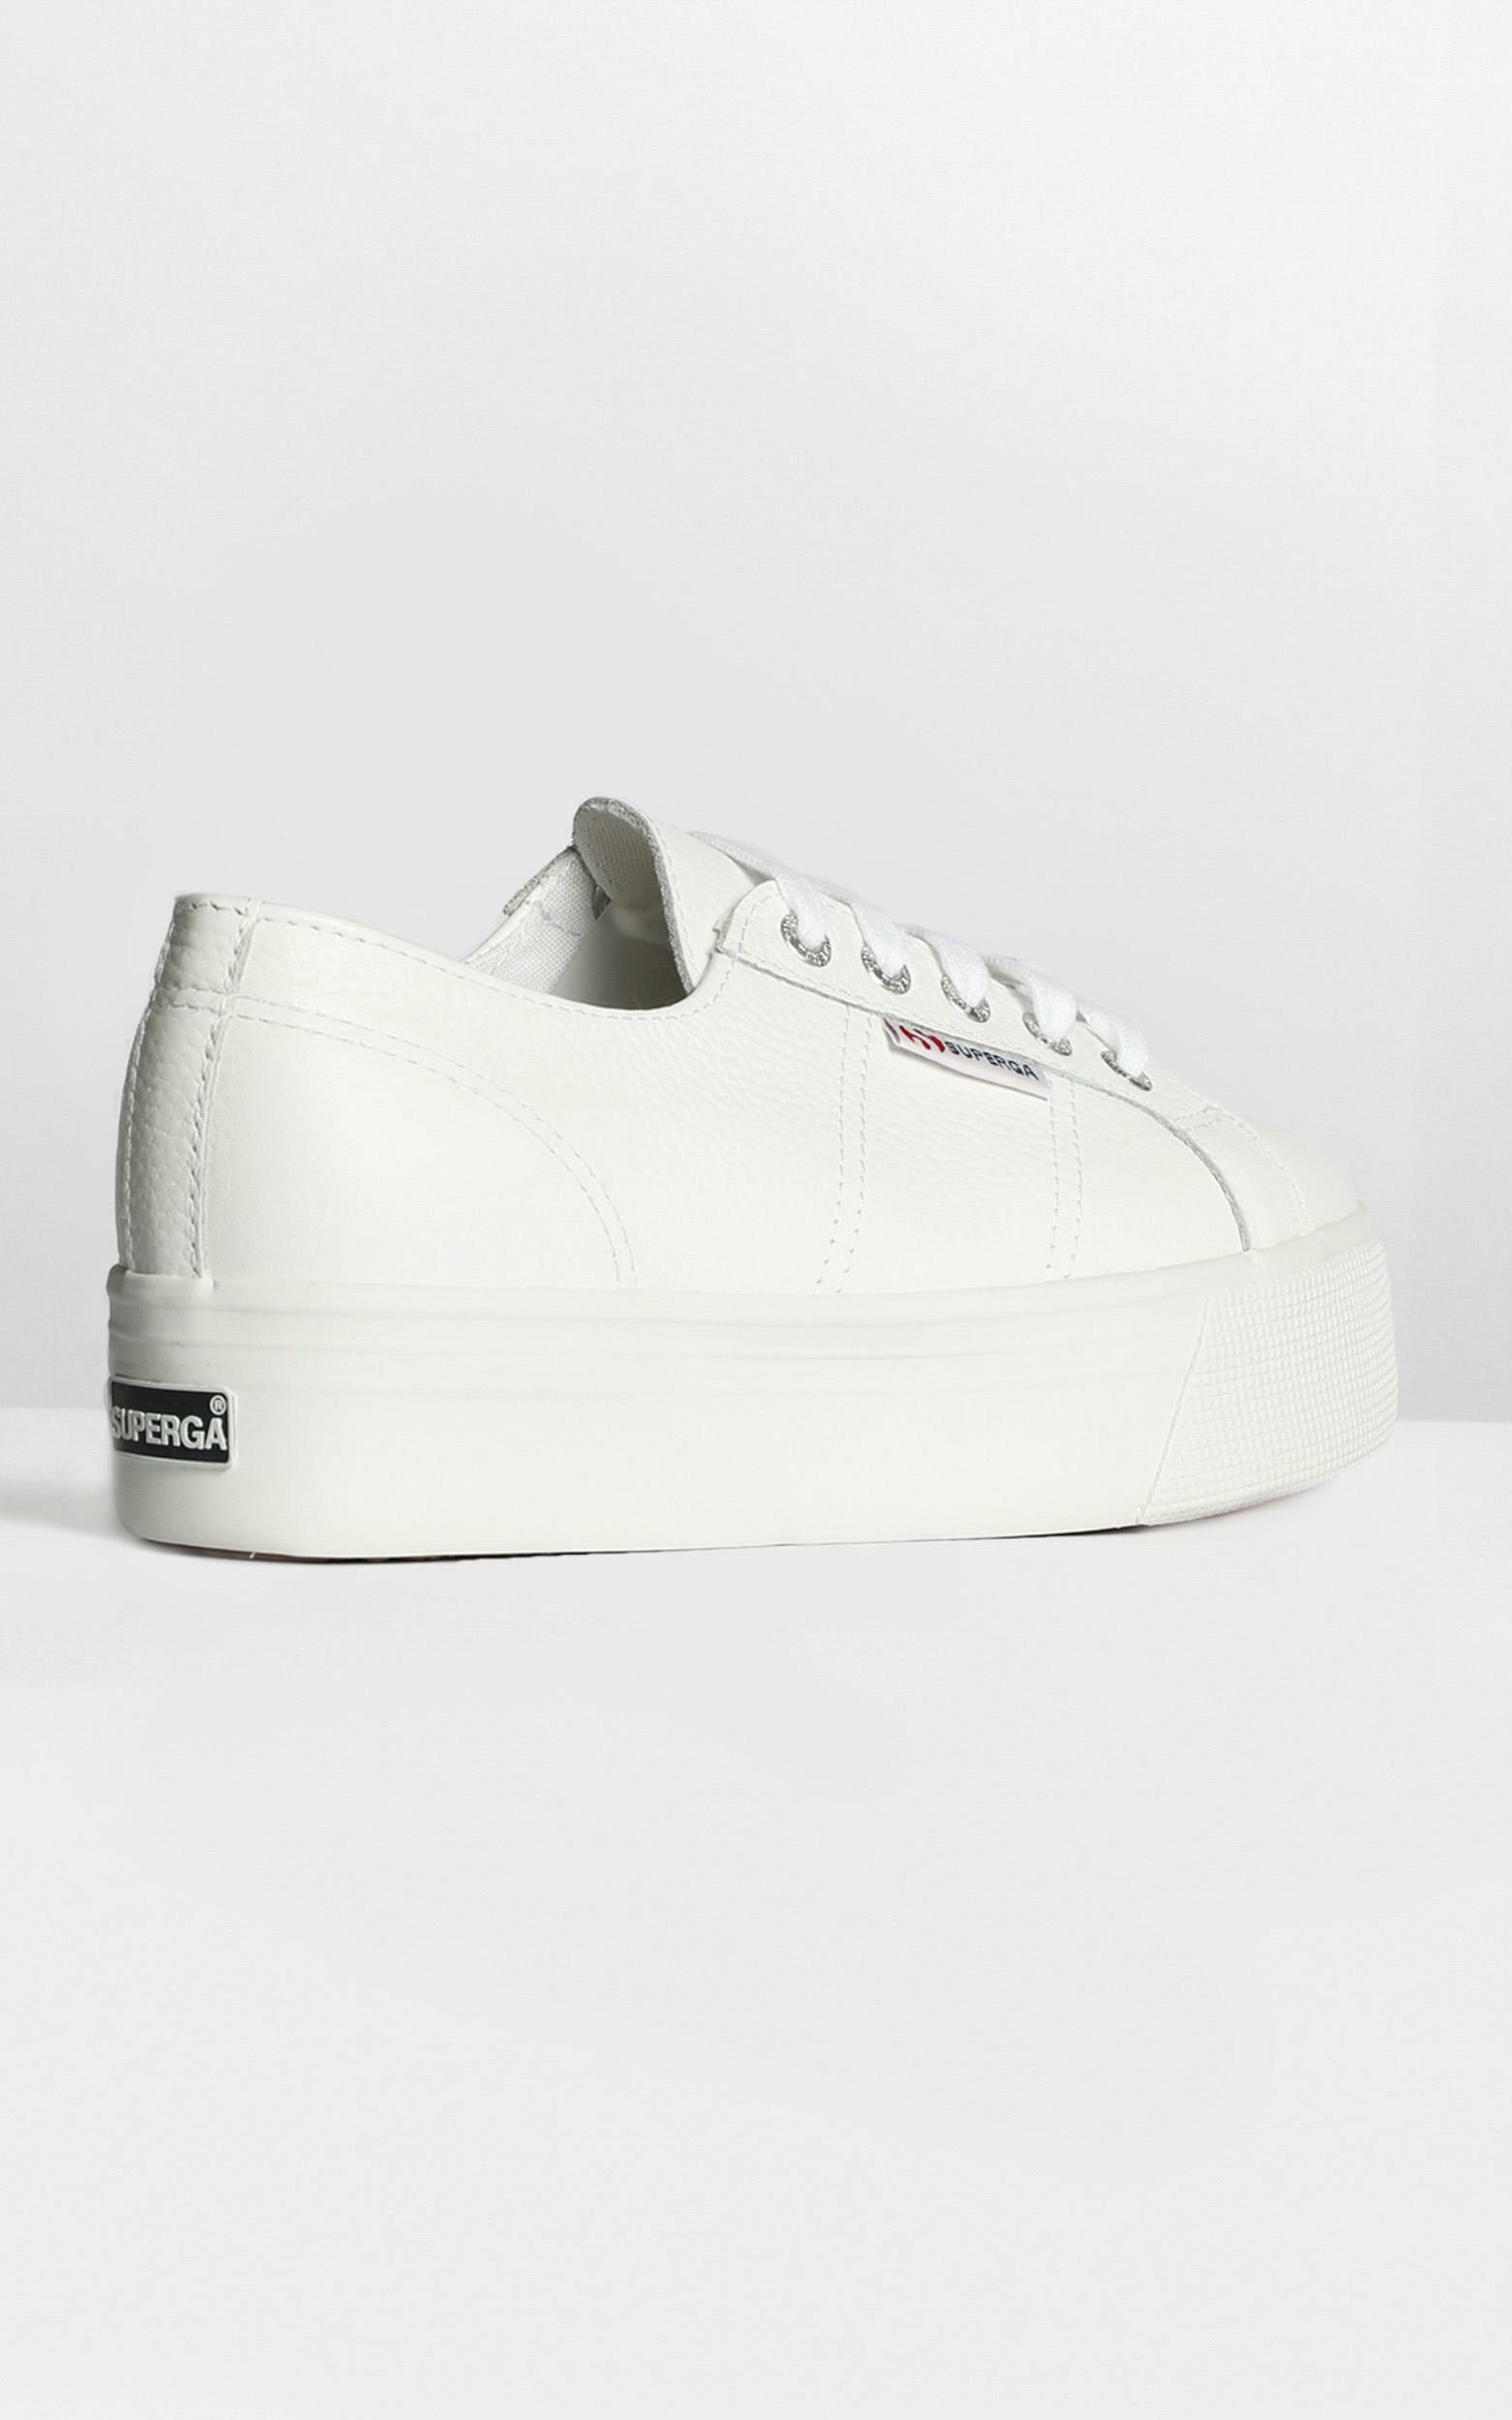 Superga - 2790 FGLW Platform Sneakers in White Leather - 09, WHT1, hi-res image number null